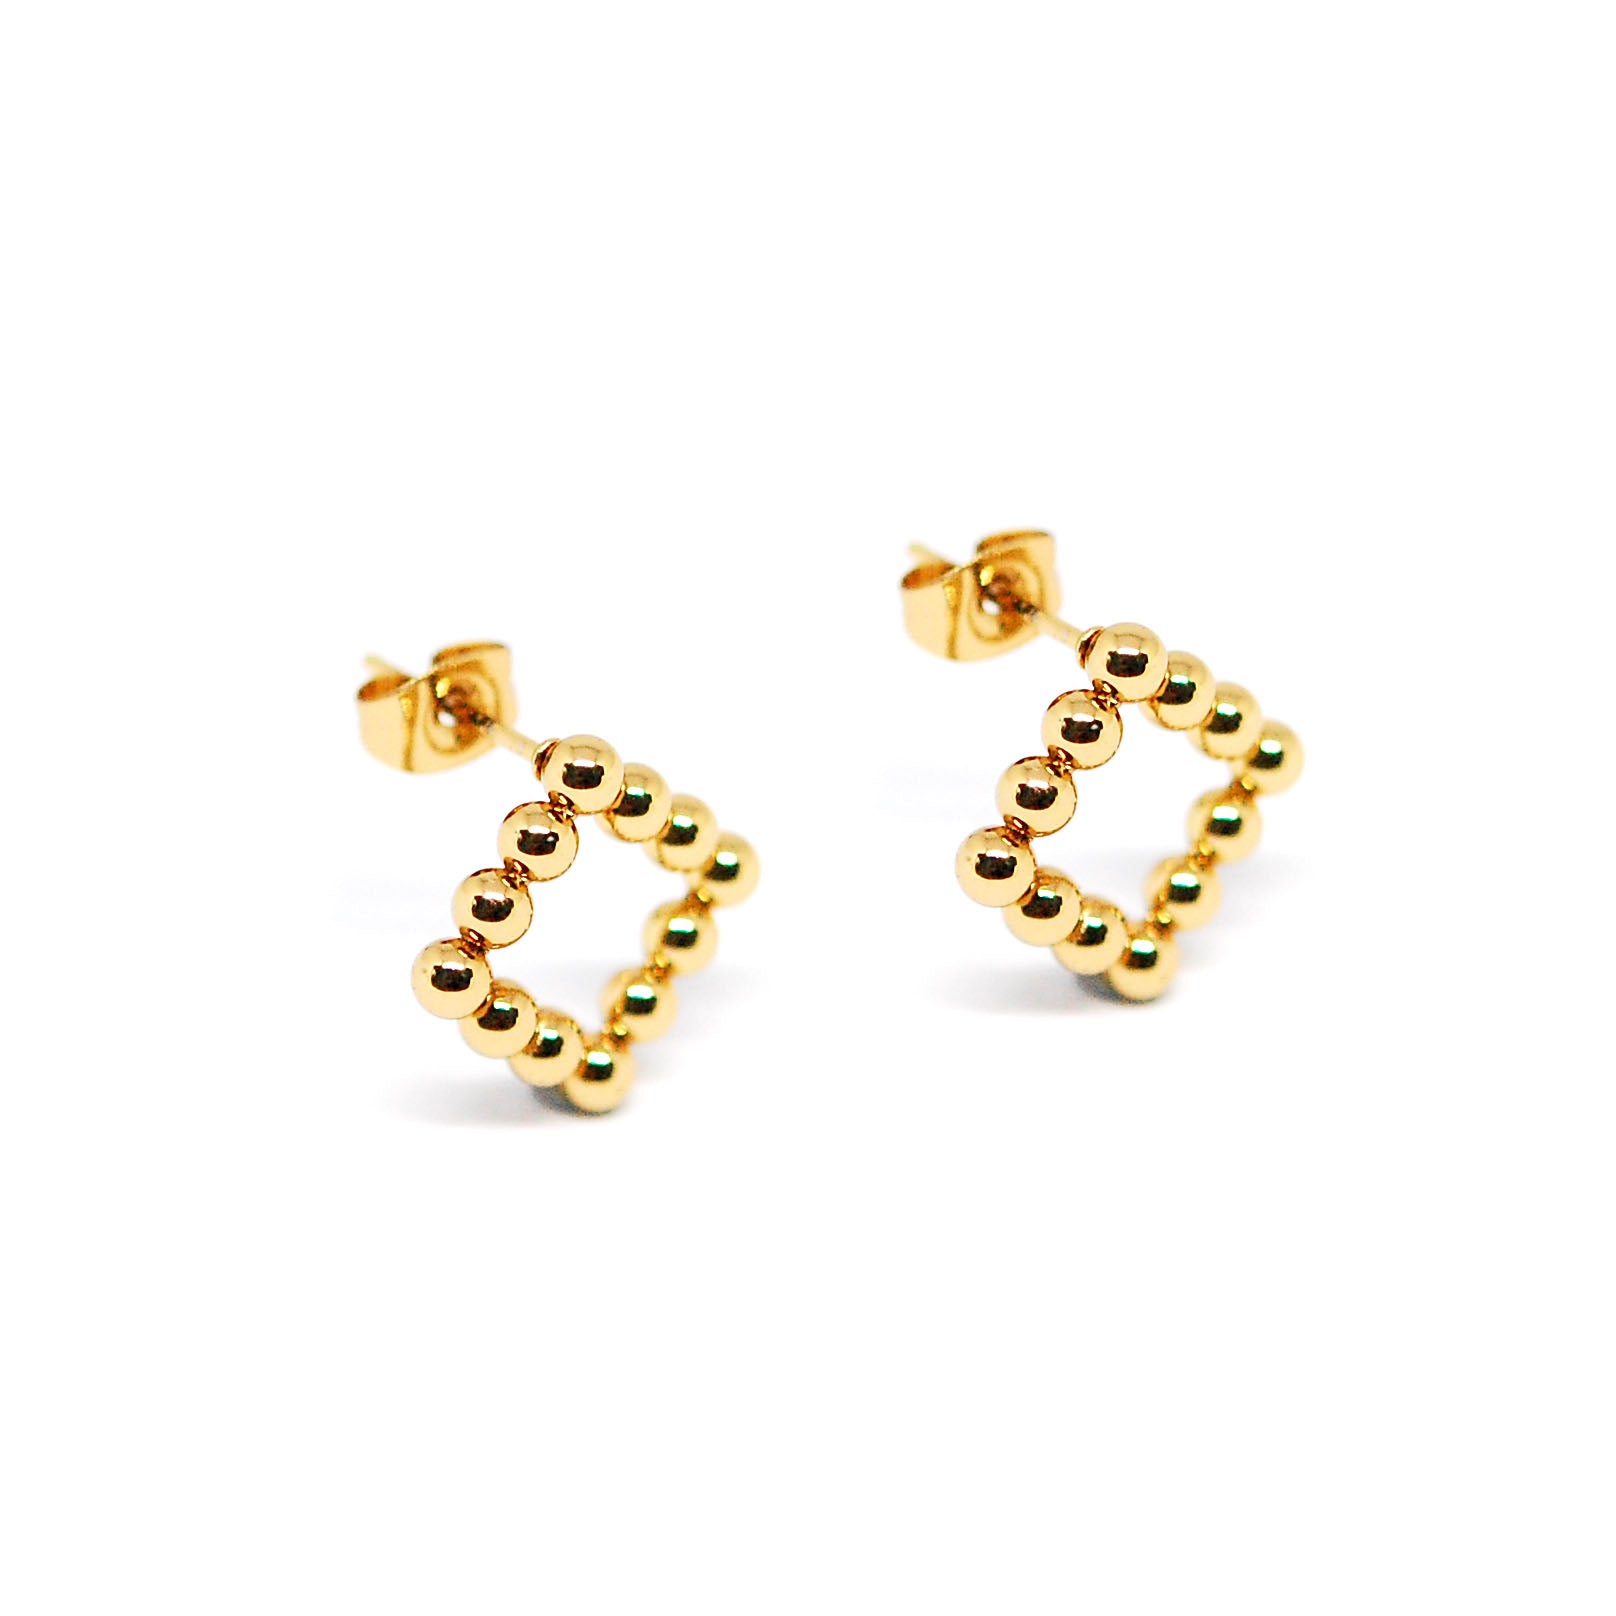 ESE 7699: All IPG Multi-Ball Square Earrings (12mm)